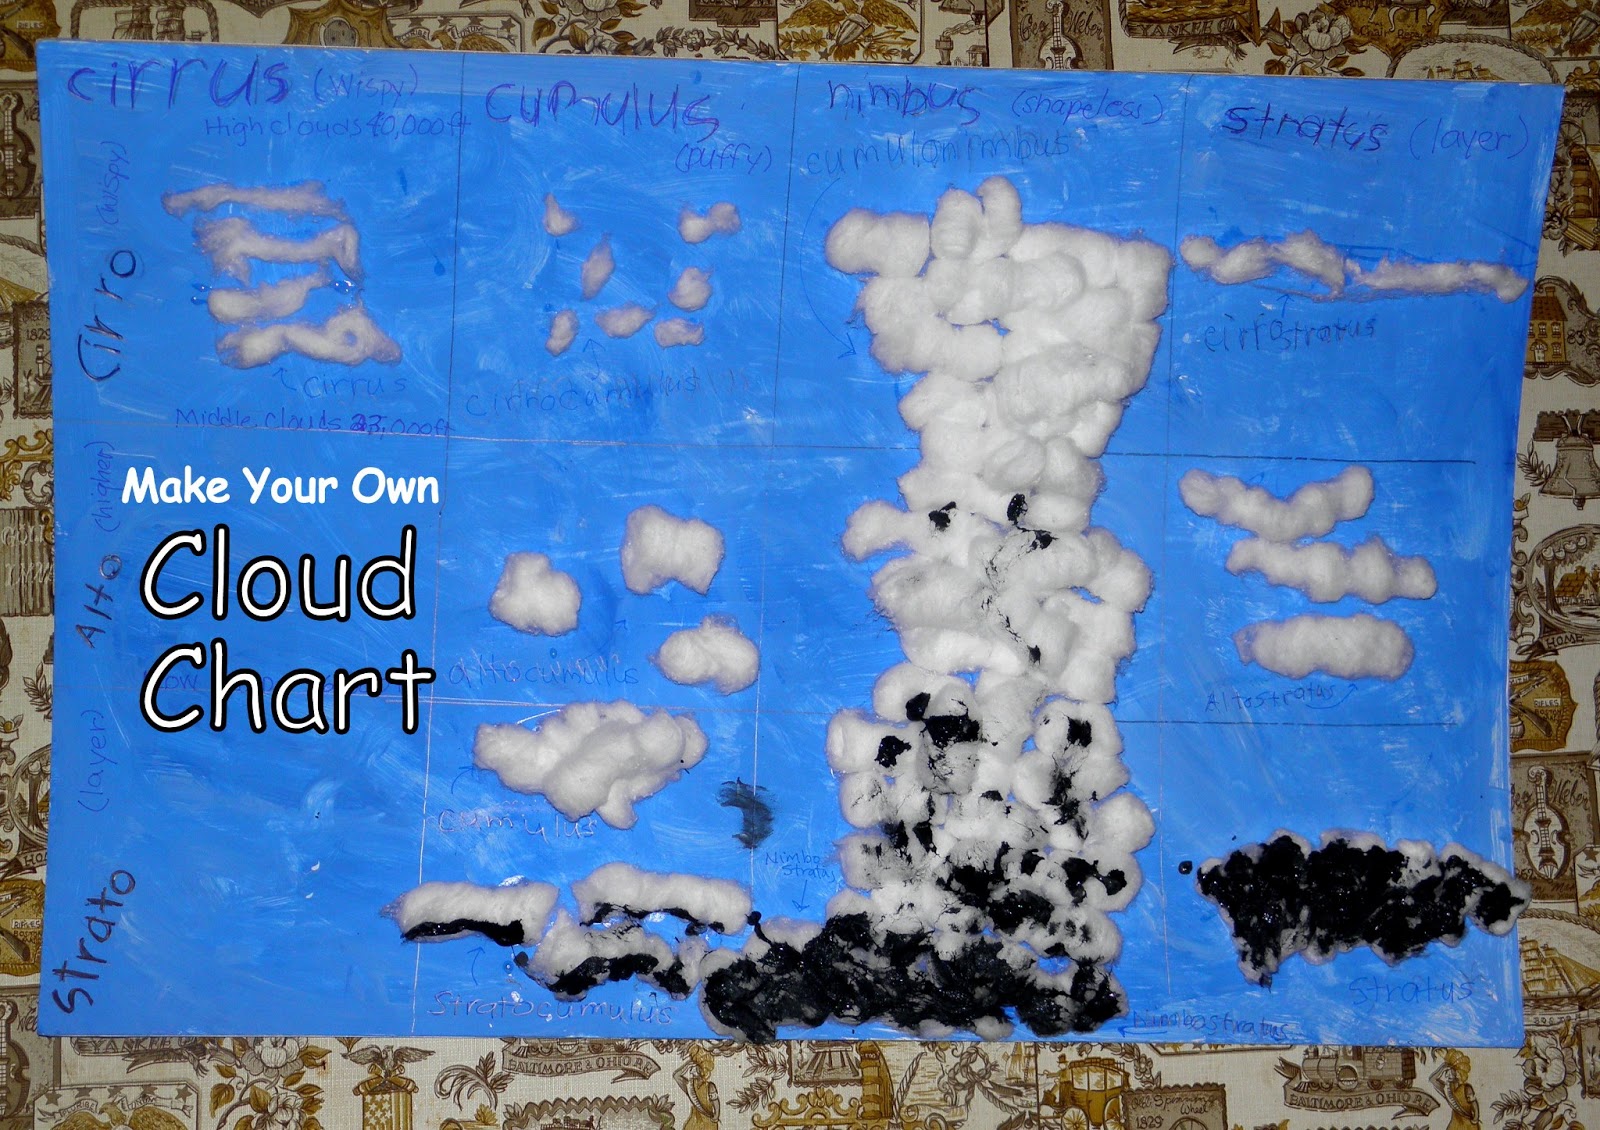 All Things Beautiful: Make Your Own 3-D Cloud Chart